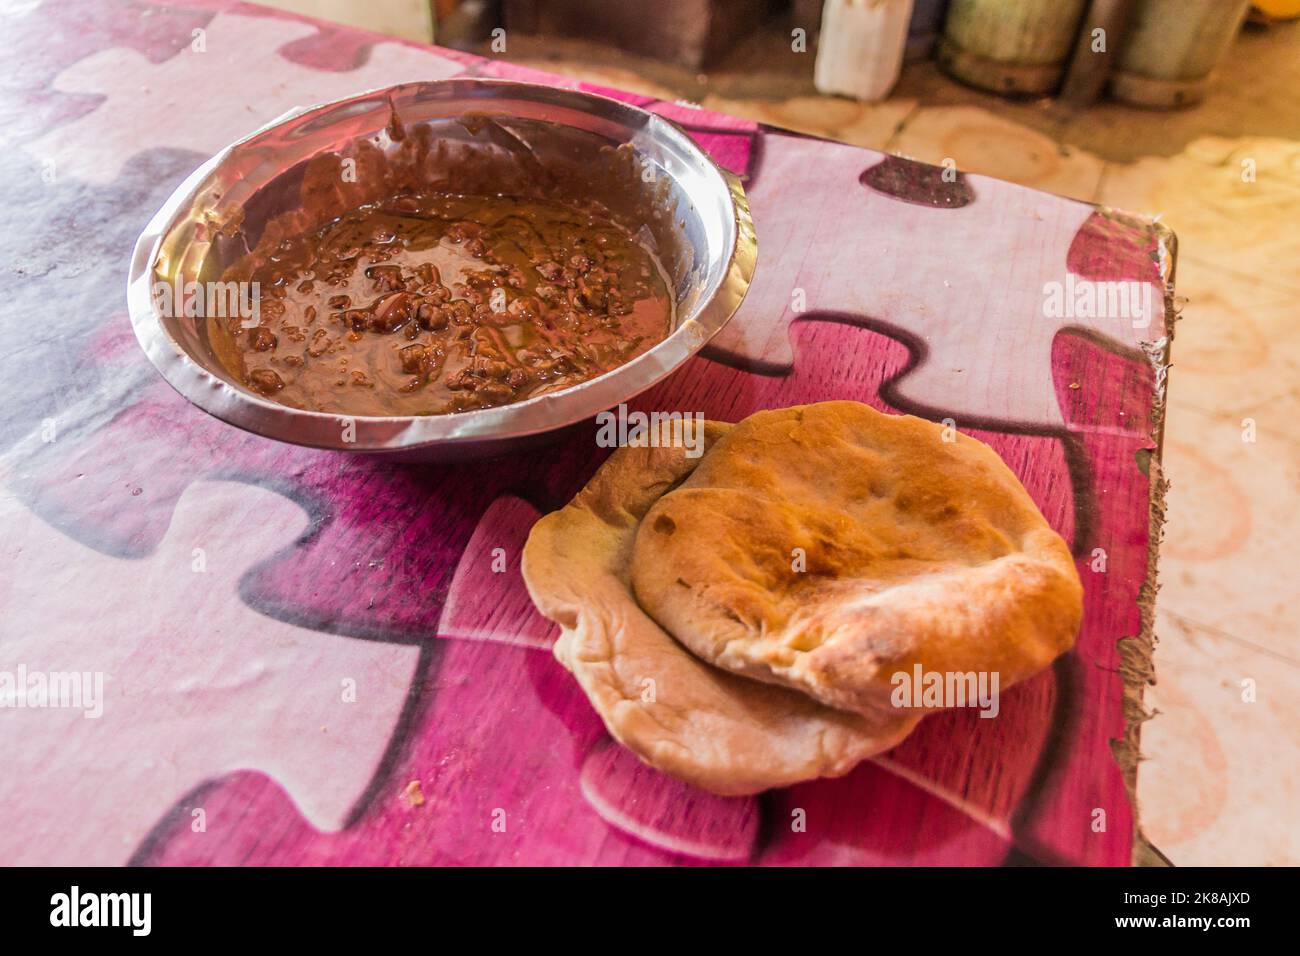 Traditional meal in Sudan - fuul (stew of cooked fava beans) and bread. Stock Photo